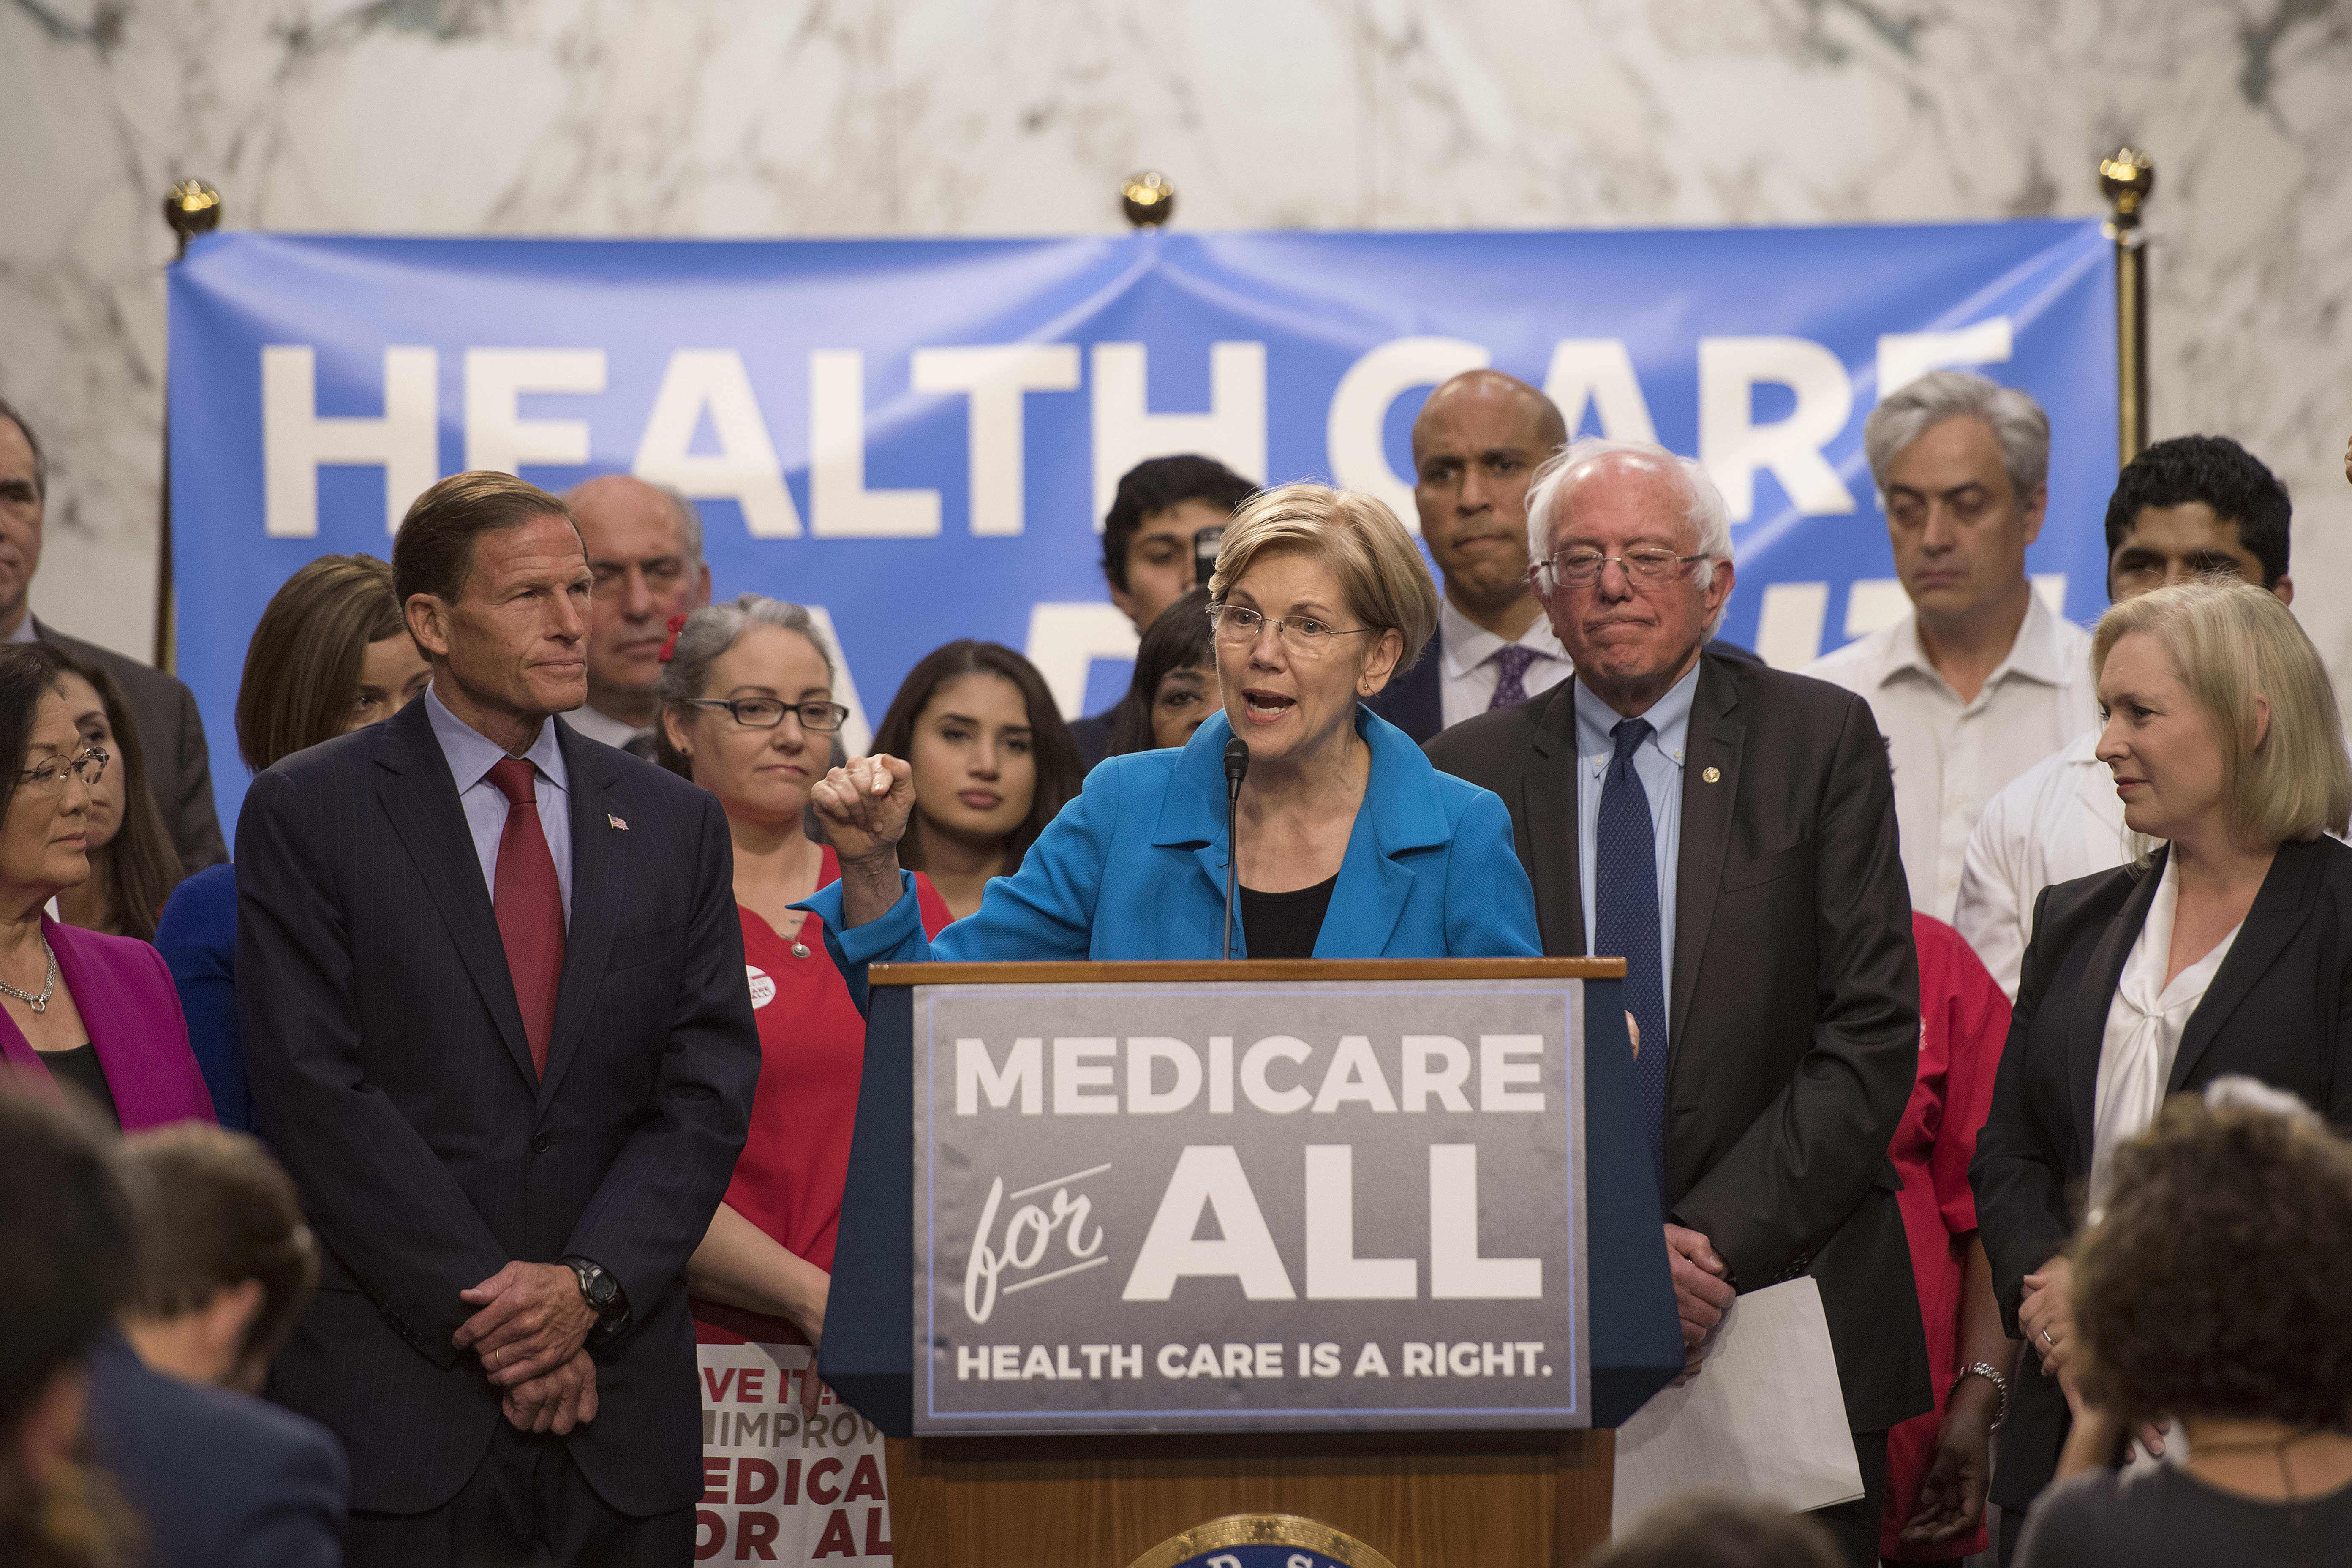 Buyers are shrugging off concern of Medicare for All – for now